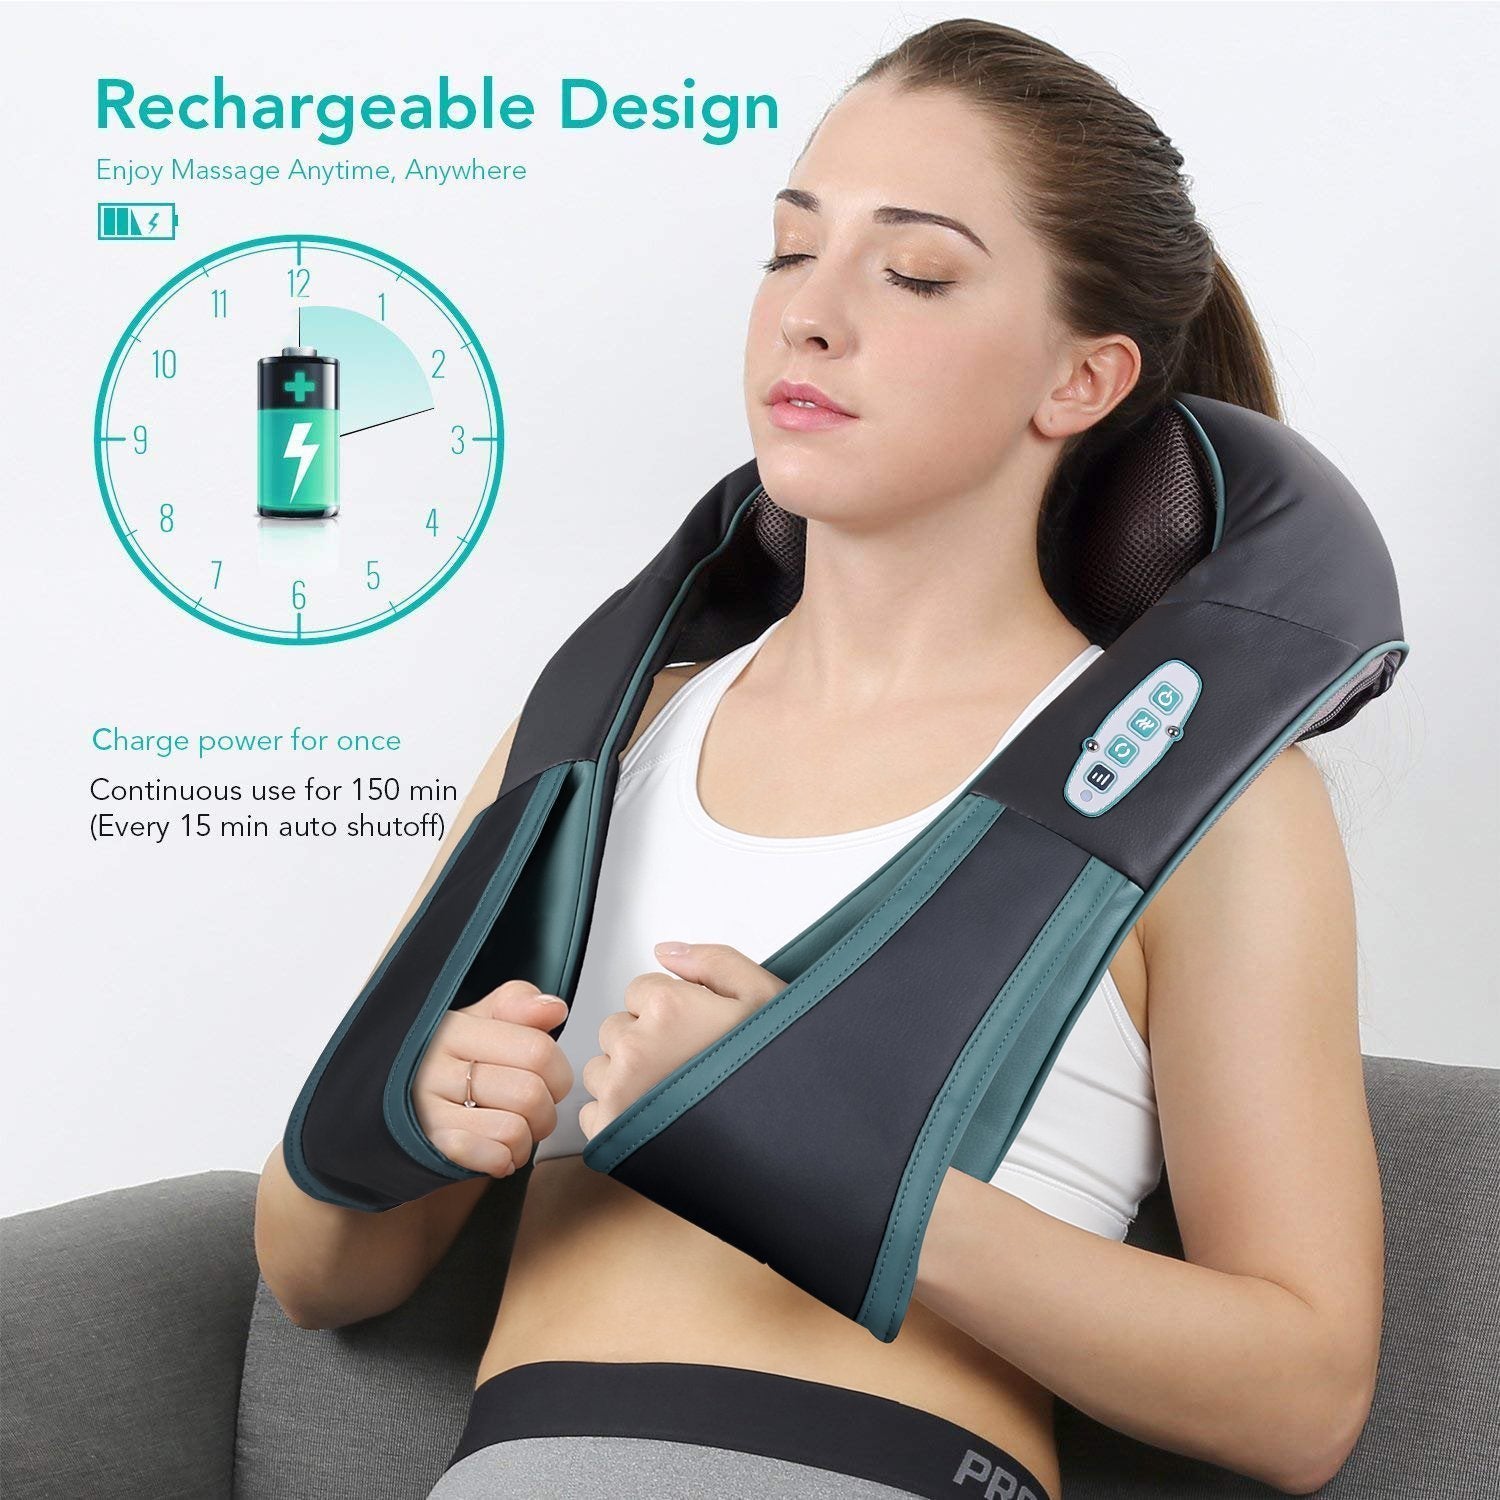 Cordless Neck and Shoulder Massager with Heat